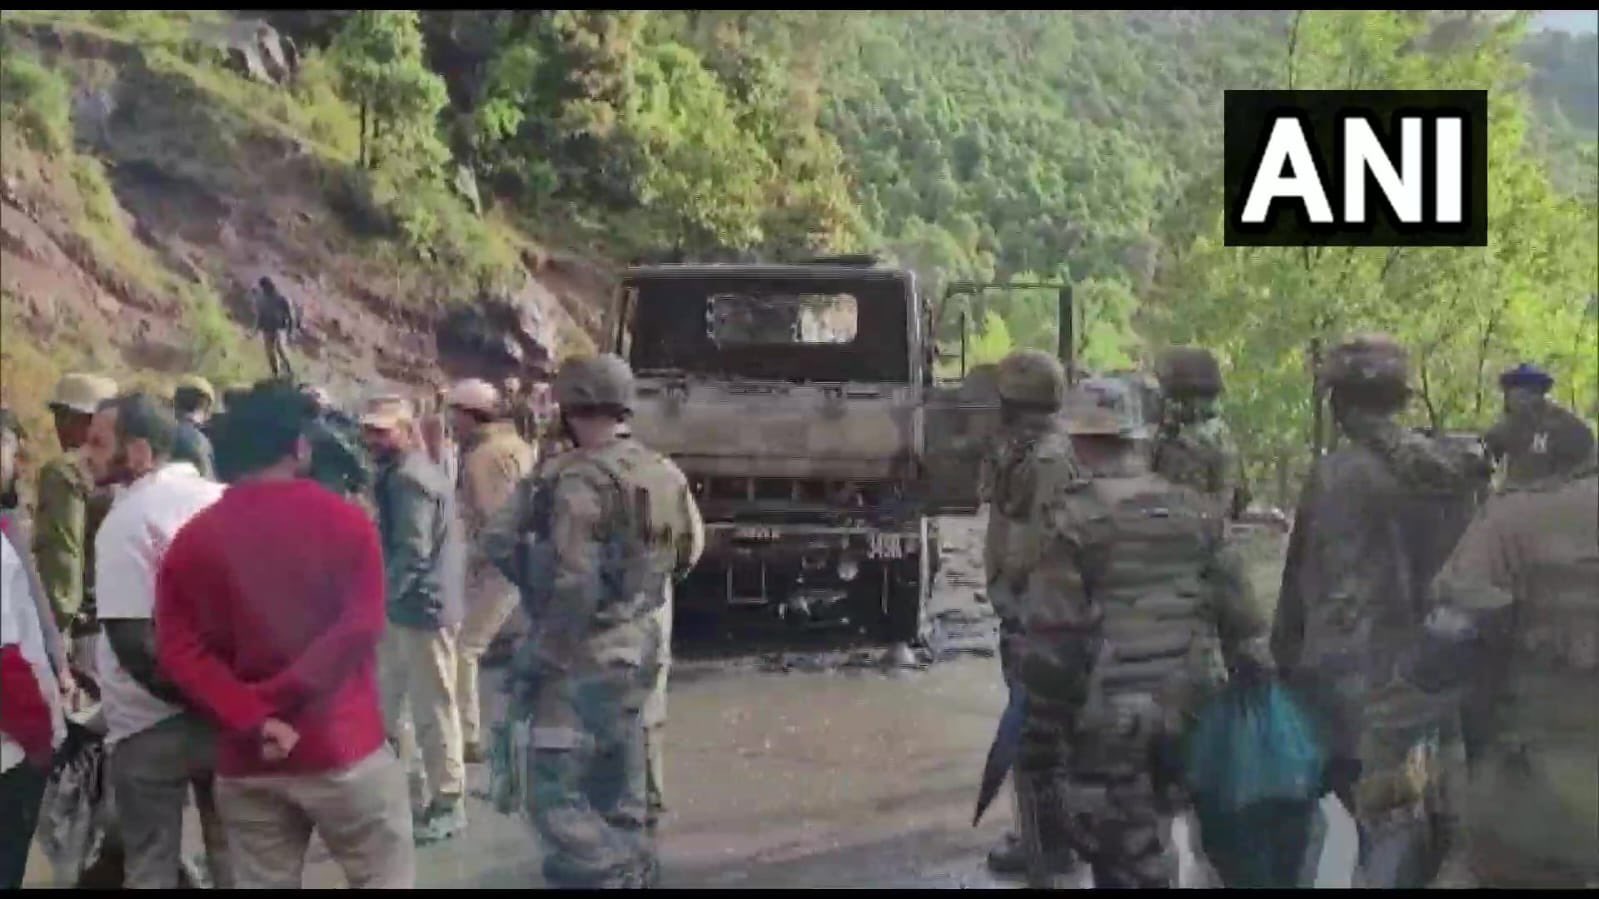 Attack on army vehicle in Poonch: Massive search ops underway to trace terrorists